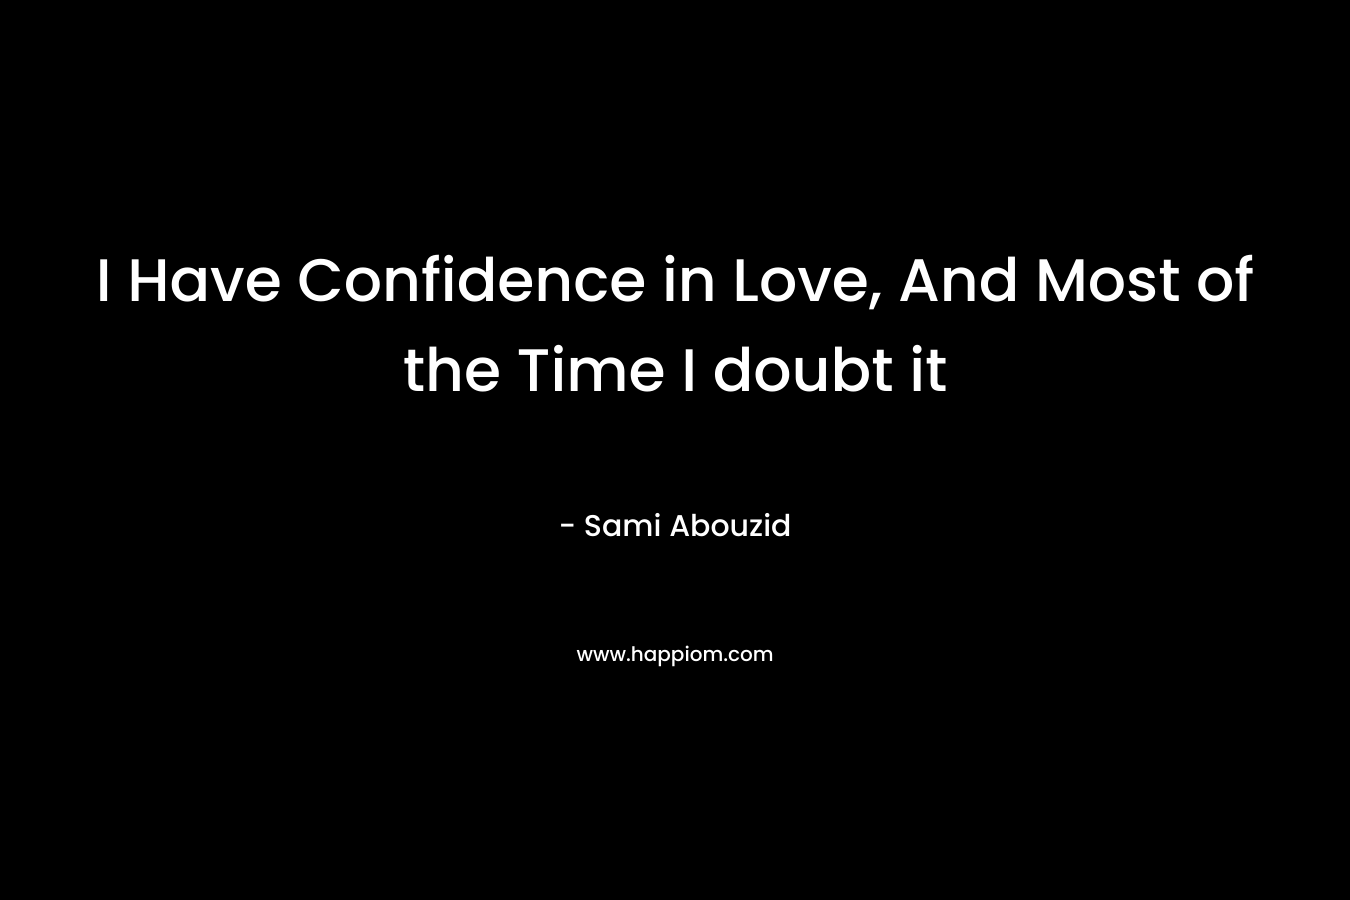 I Have Confidence in Love, And Most of the Time I doubt it